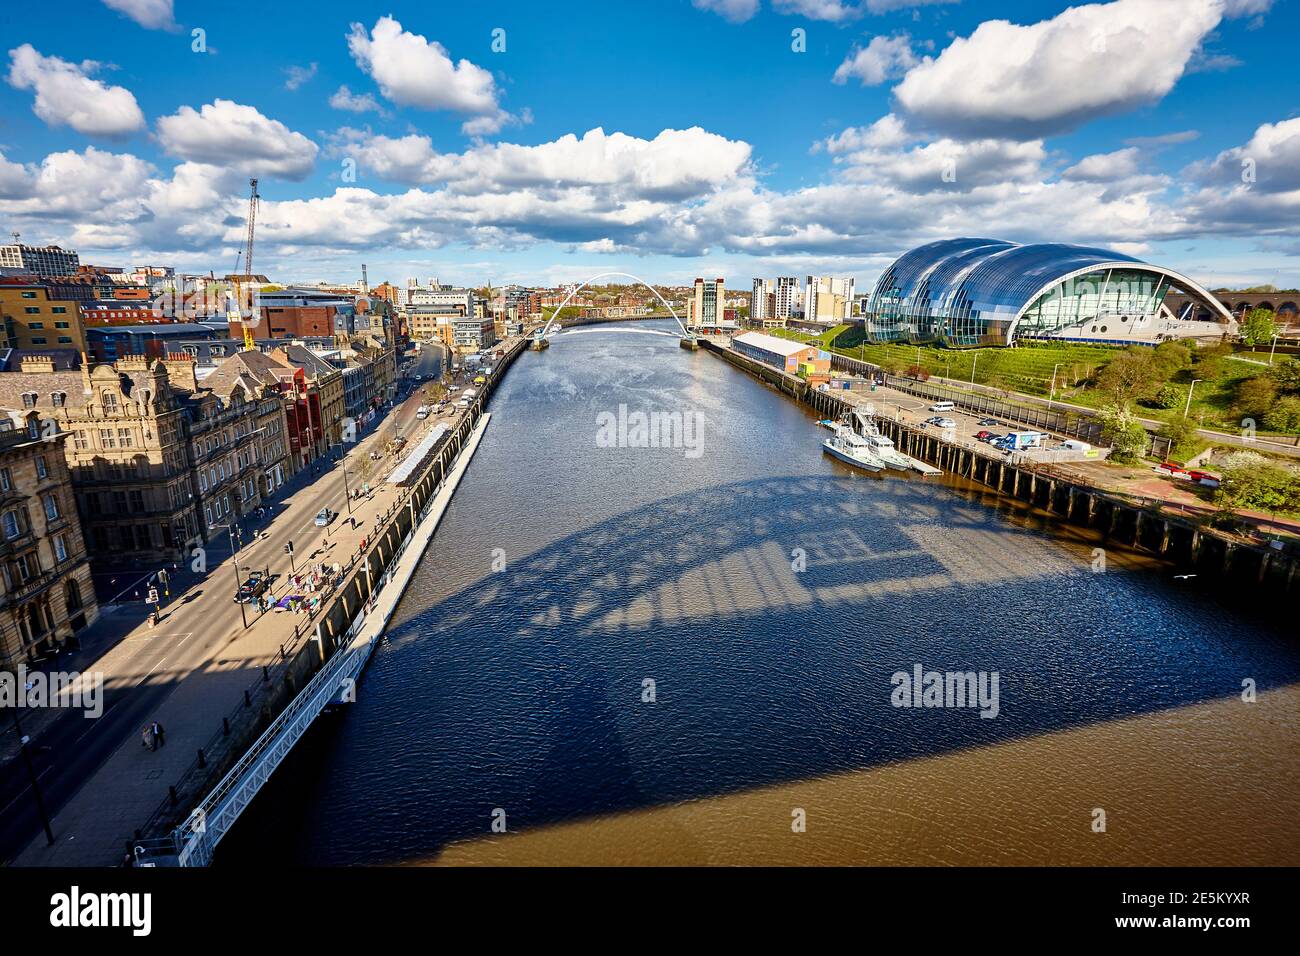 Reflection of the Tyne Bridge with the Sage in the background in the River Tyne, Newcastle Upon Tyne, Tyneside, UK Stock Photo